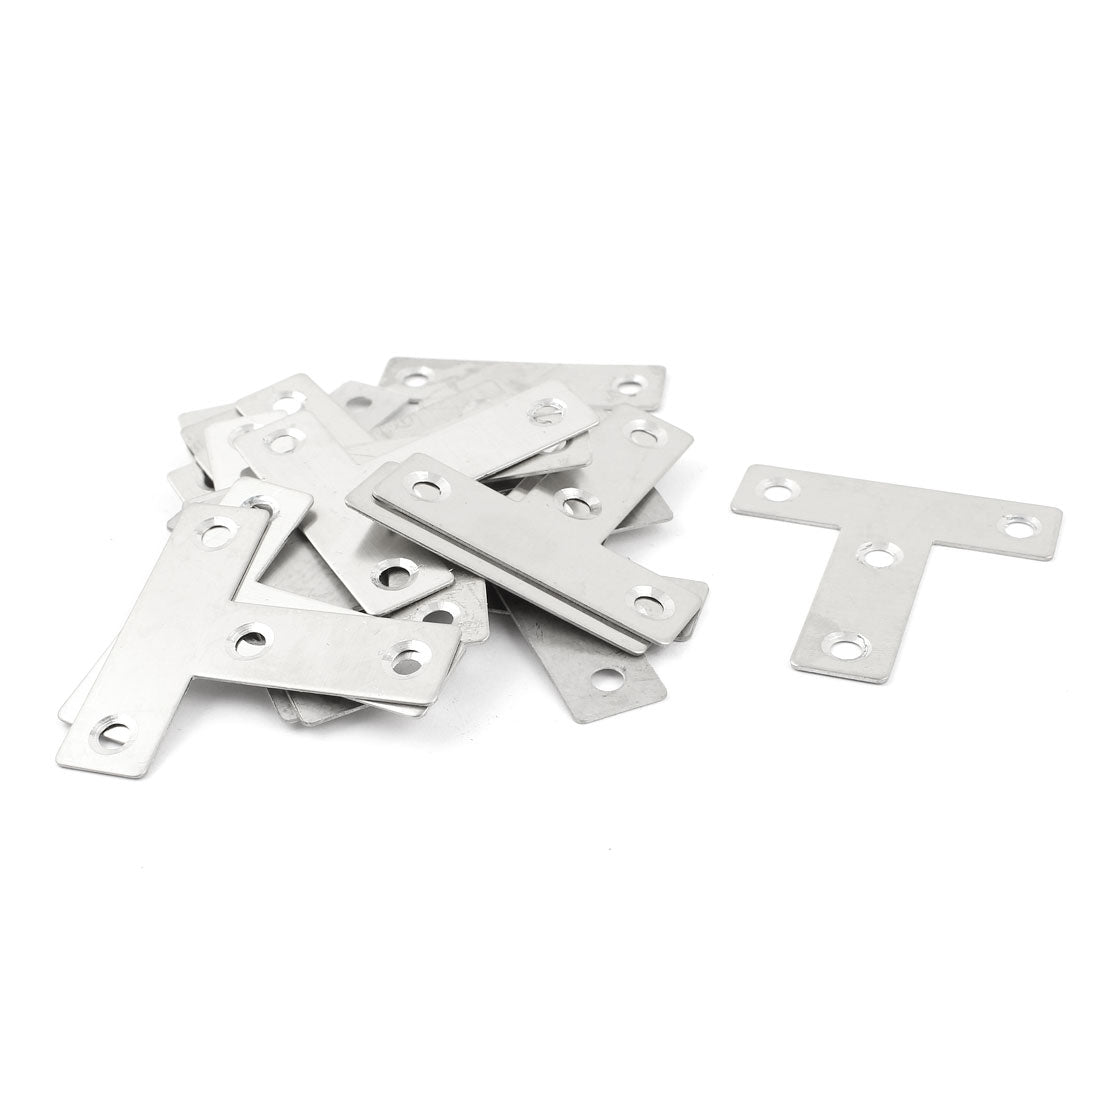 uxcell Uxcell 20 Pcs Silver Tone Stainless Steel Wall Mount T Style Support Shelf Bracket 5cm